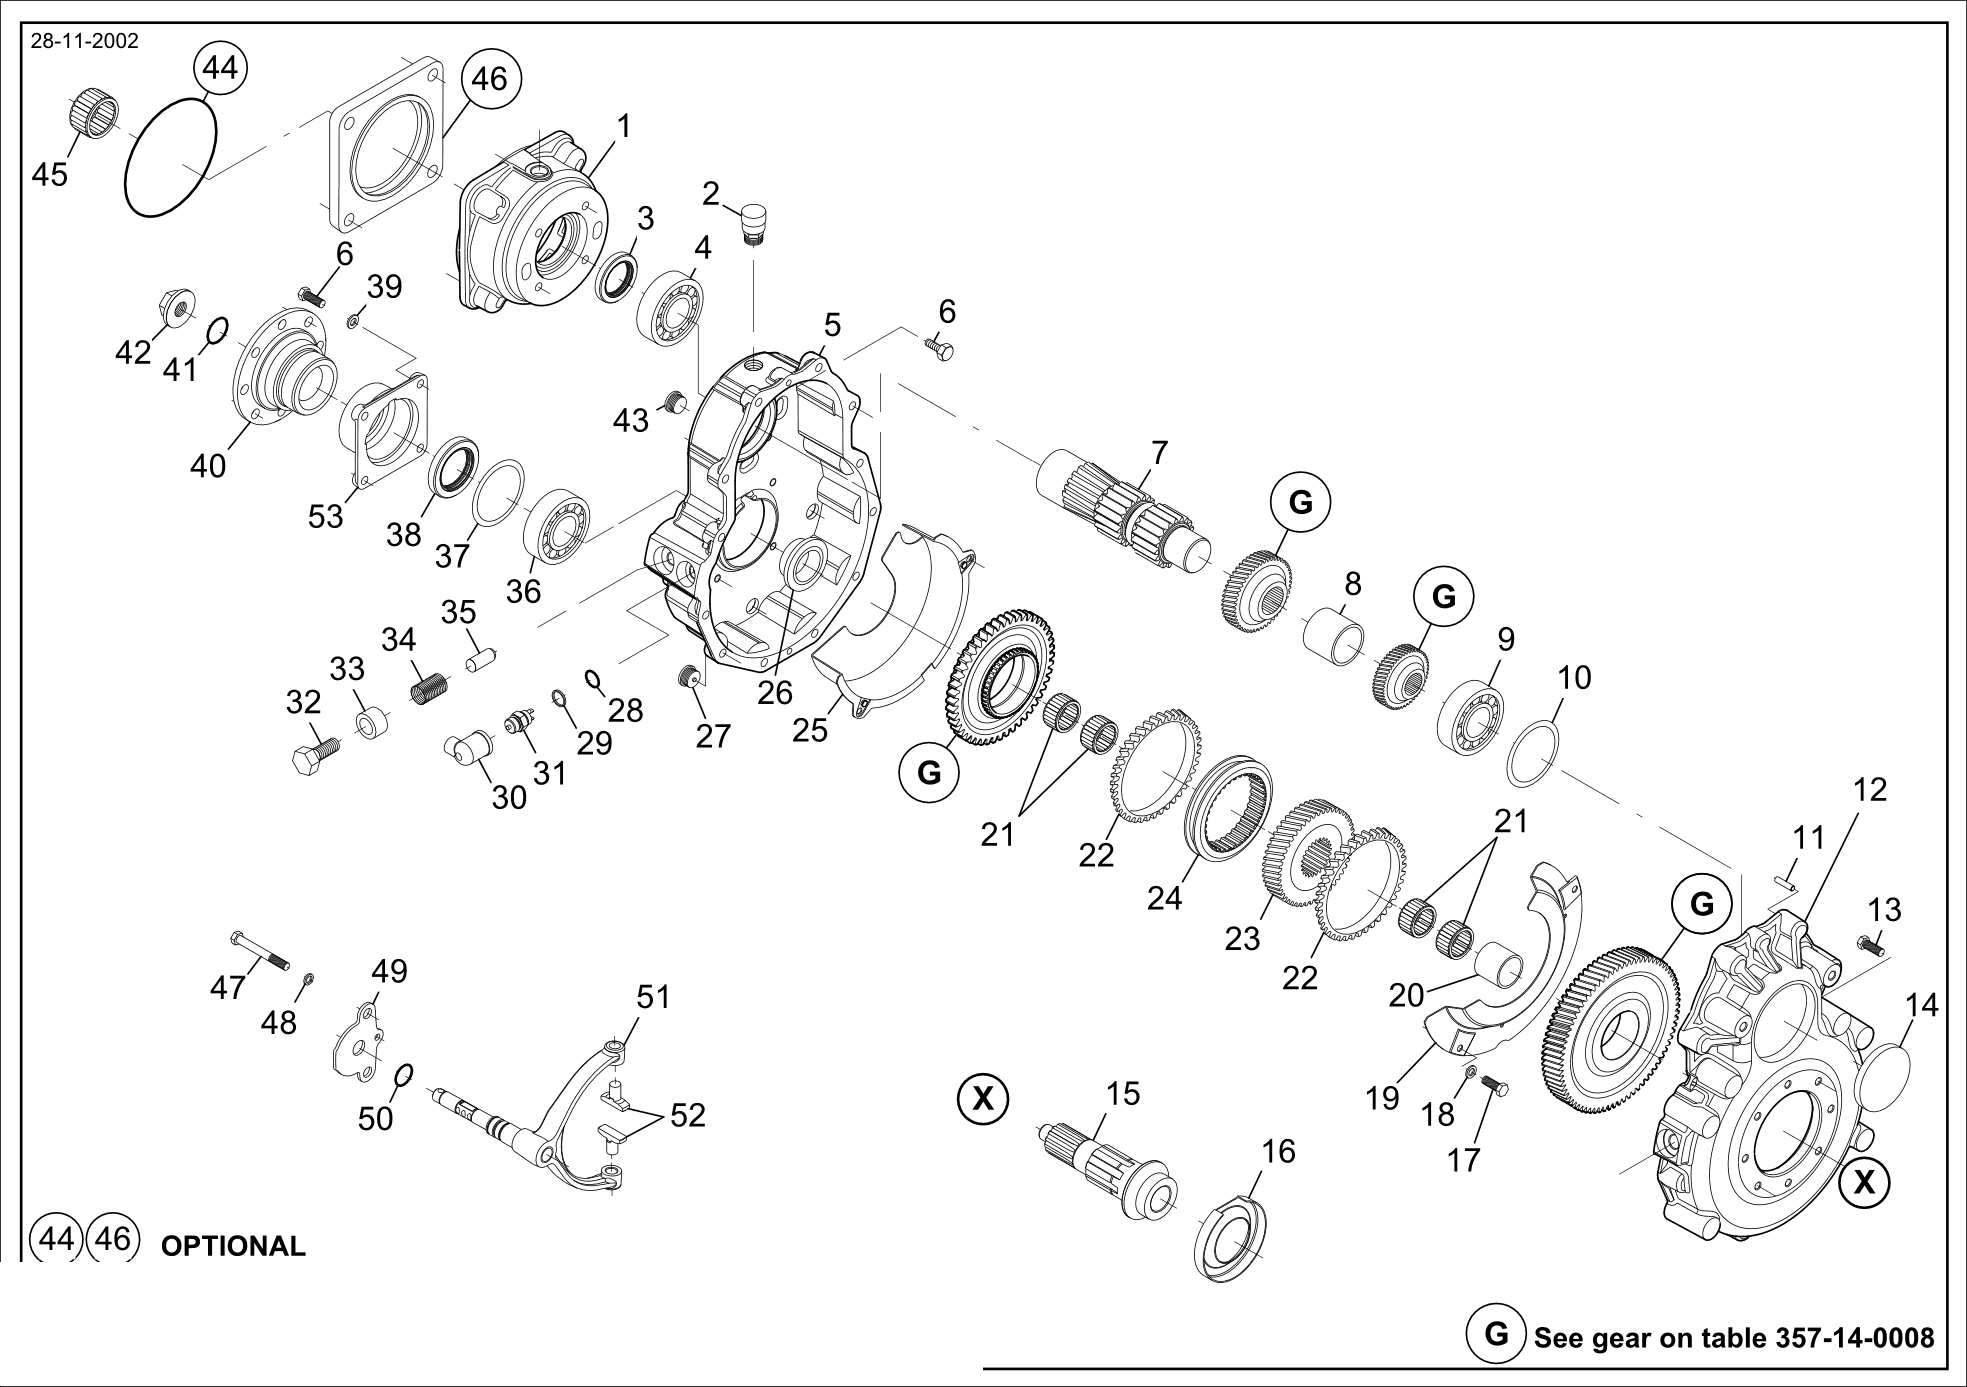 drawing for CNH NEW HOLLAND 153310953 - CHANGE SELECTOR (figure 5)